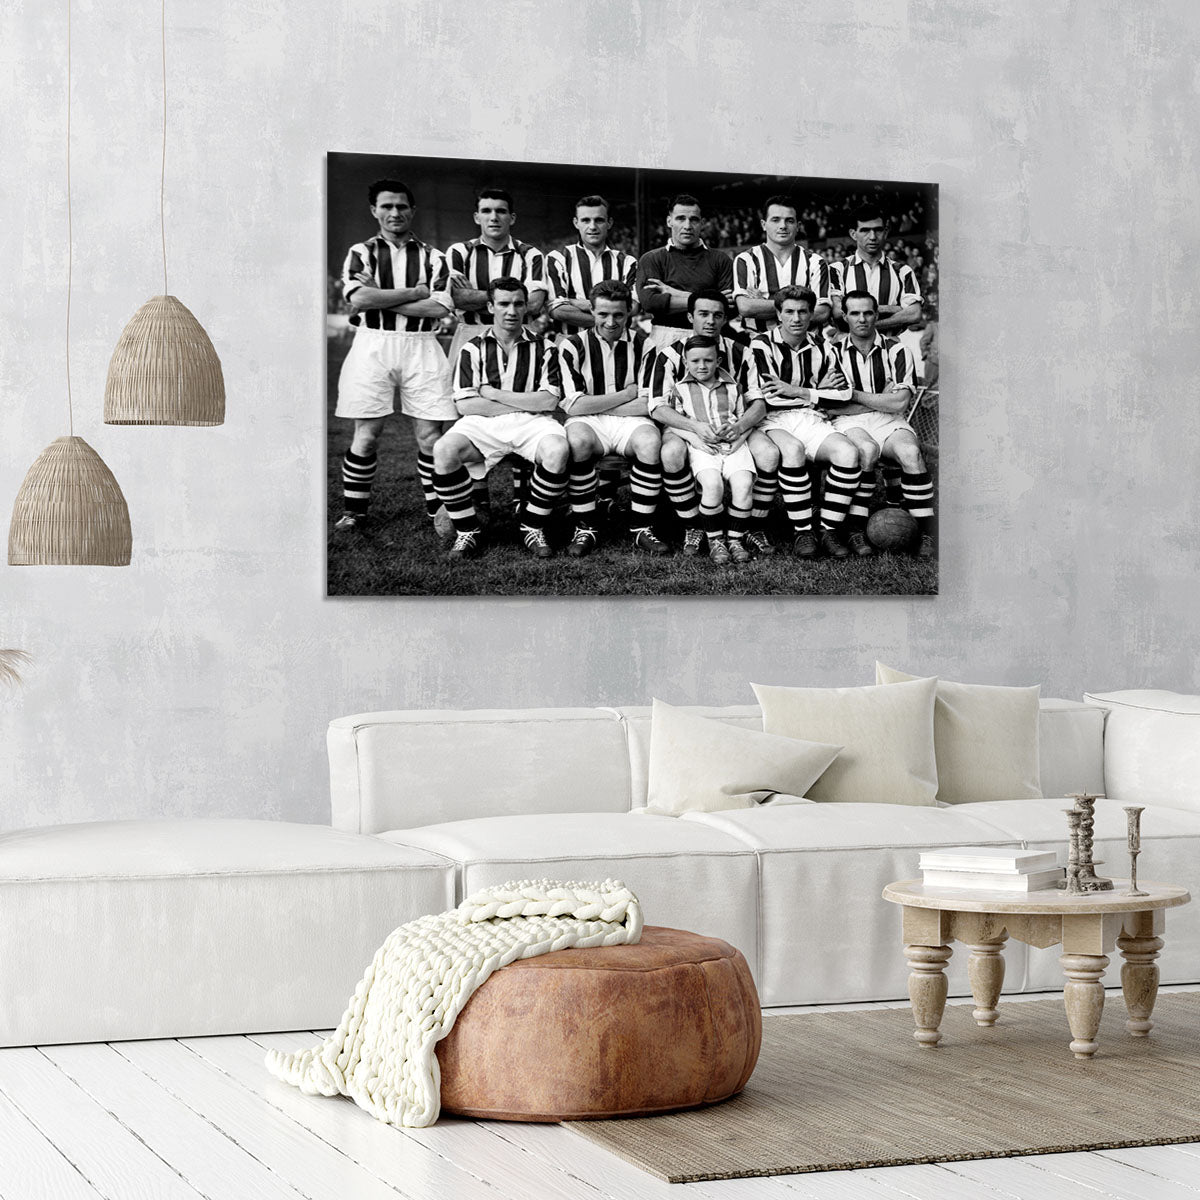 West Bromwich Albion Football Club Team Photo 1955-56 Canvas Print or Poster - Canvas Art Rocks - 6